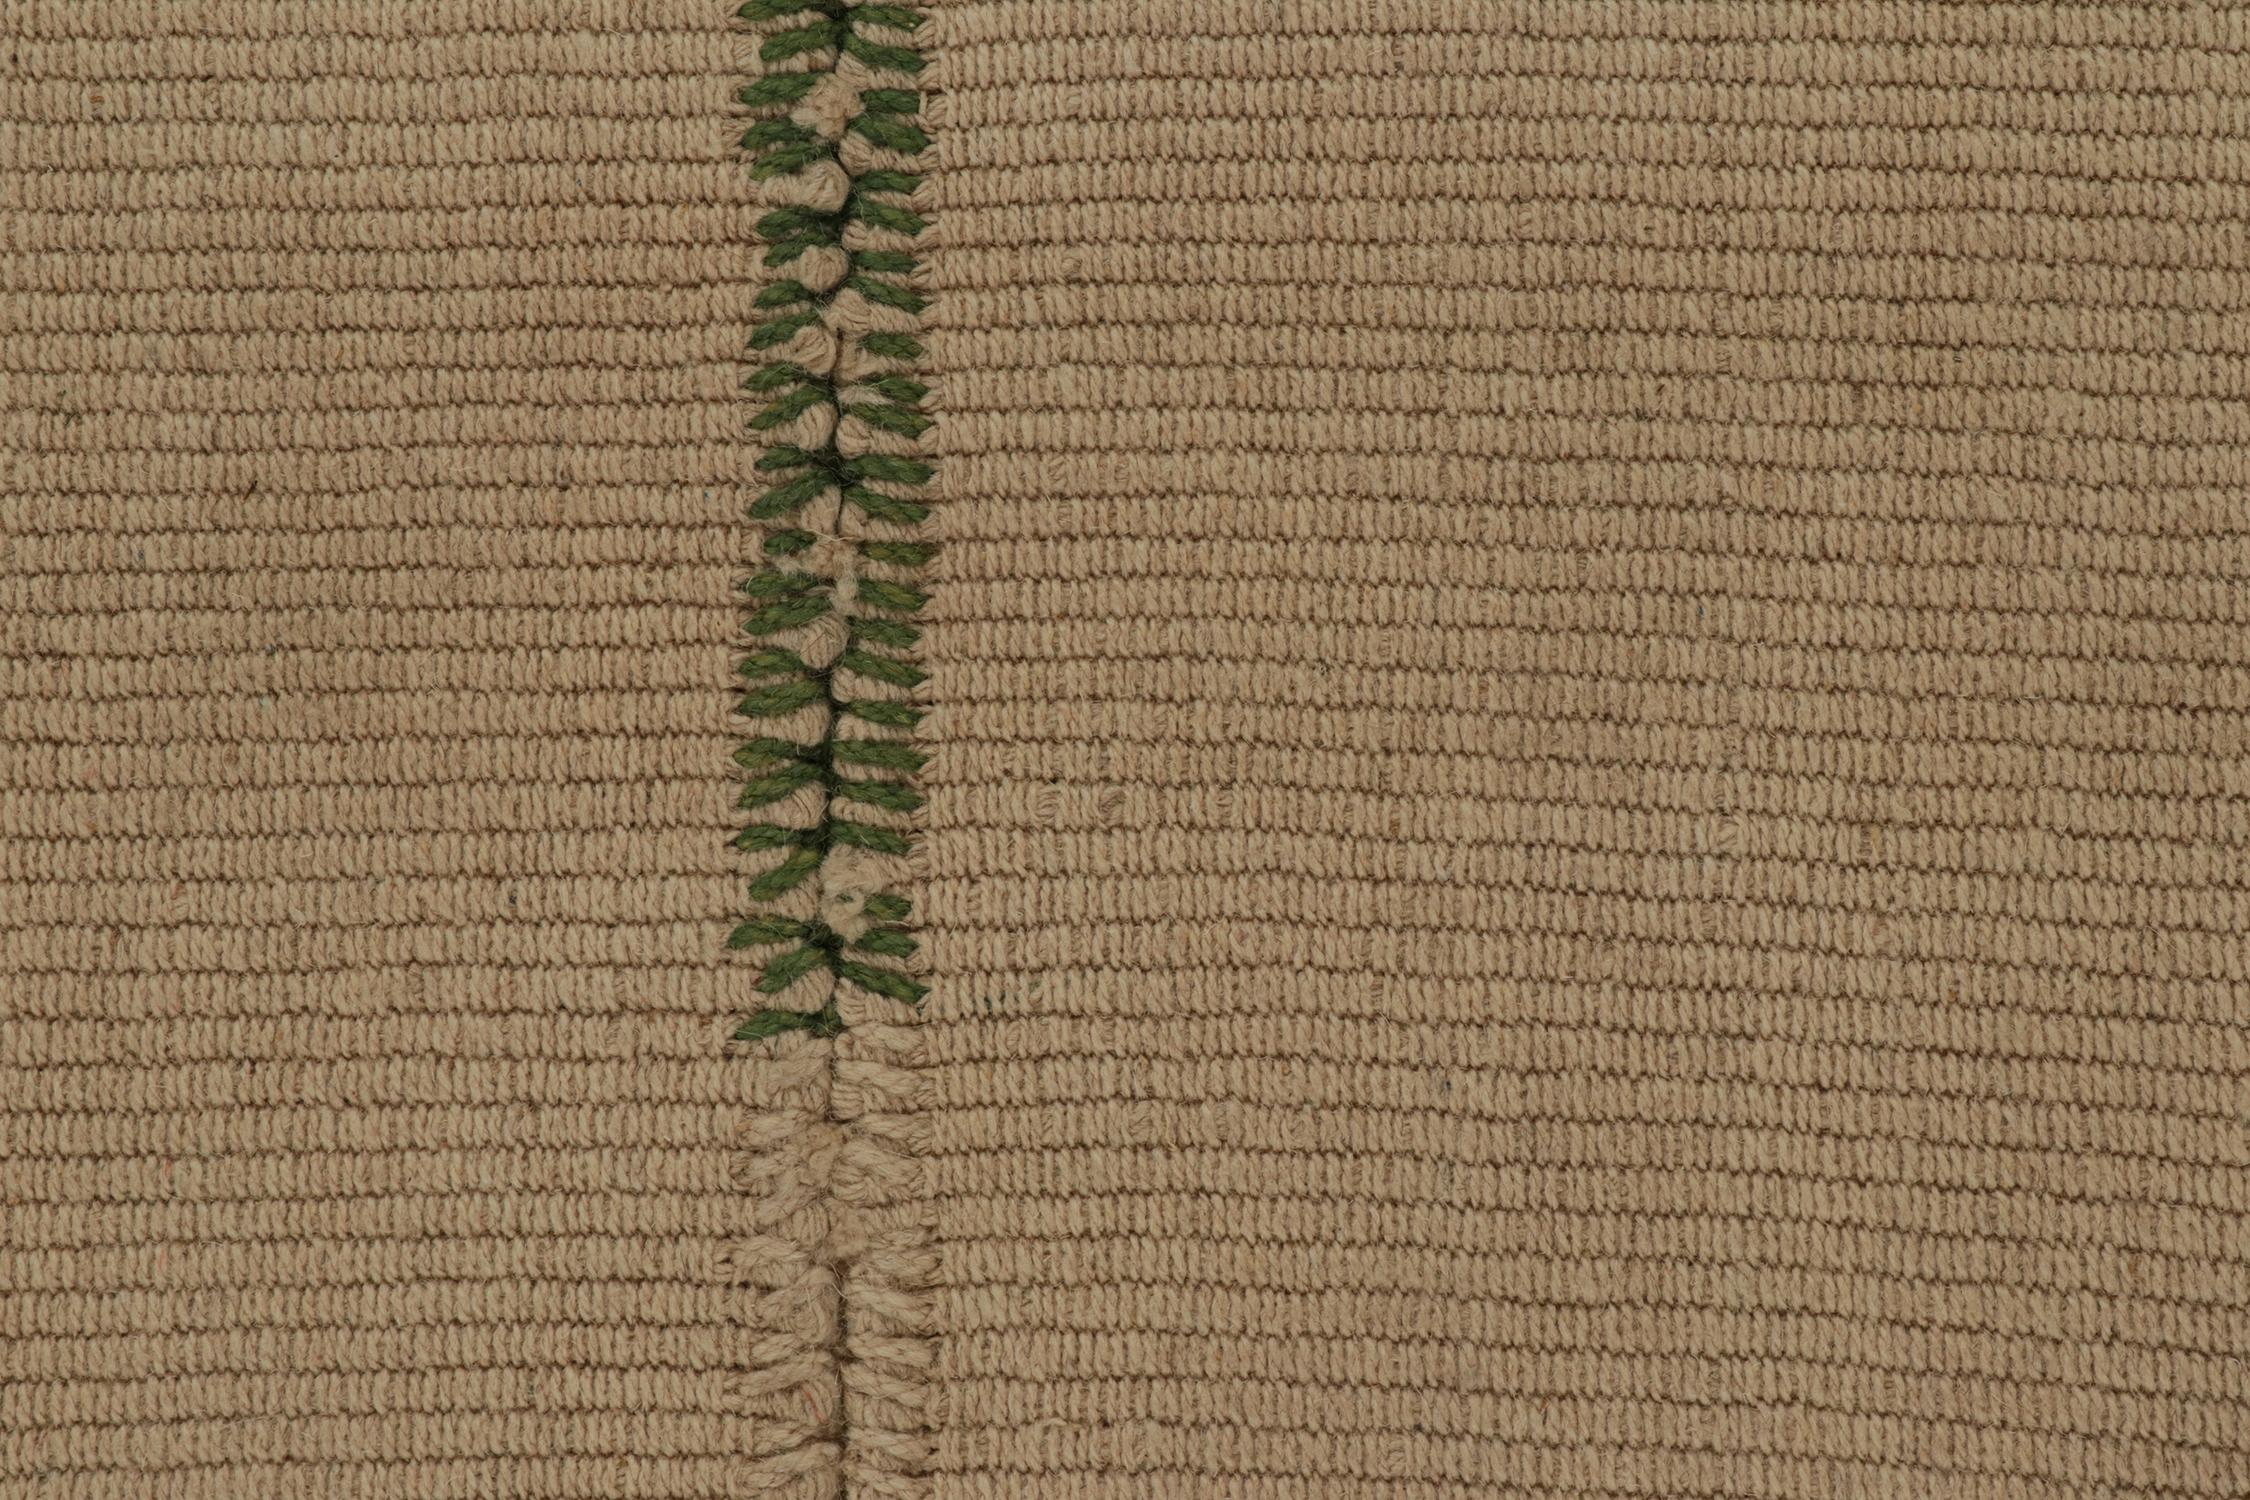 Rug & Kilim’s Contemporary Kilim in Beige-Brown with Green Accents In New Condition For Sale In Long Island City, NY